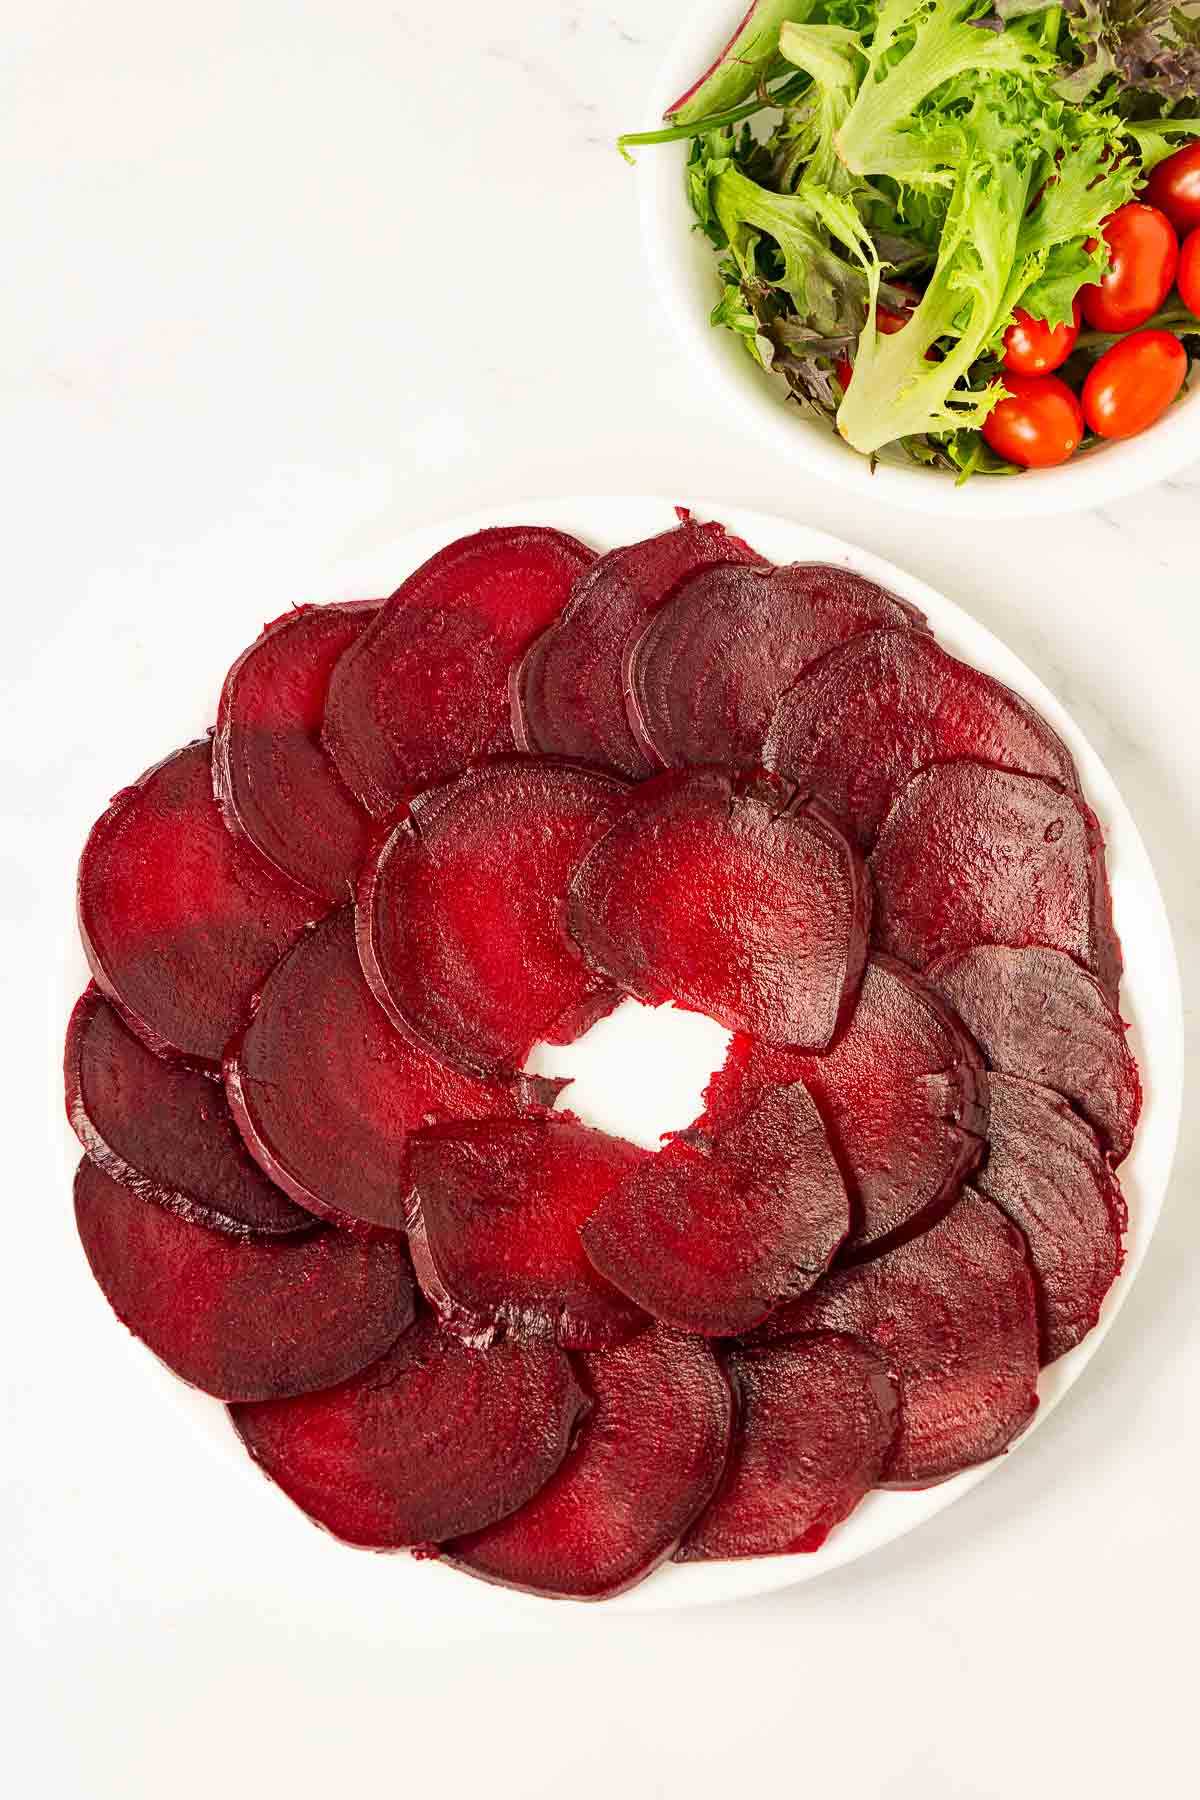 Thinly sliced beets arranged on a plate